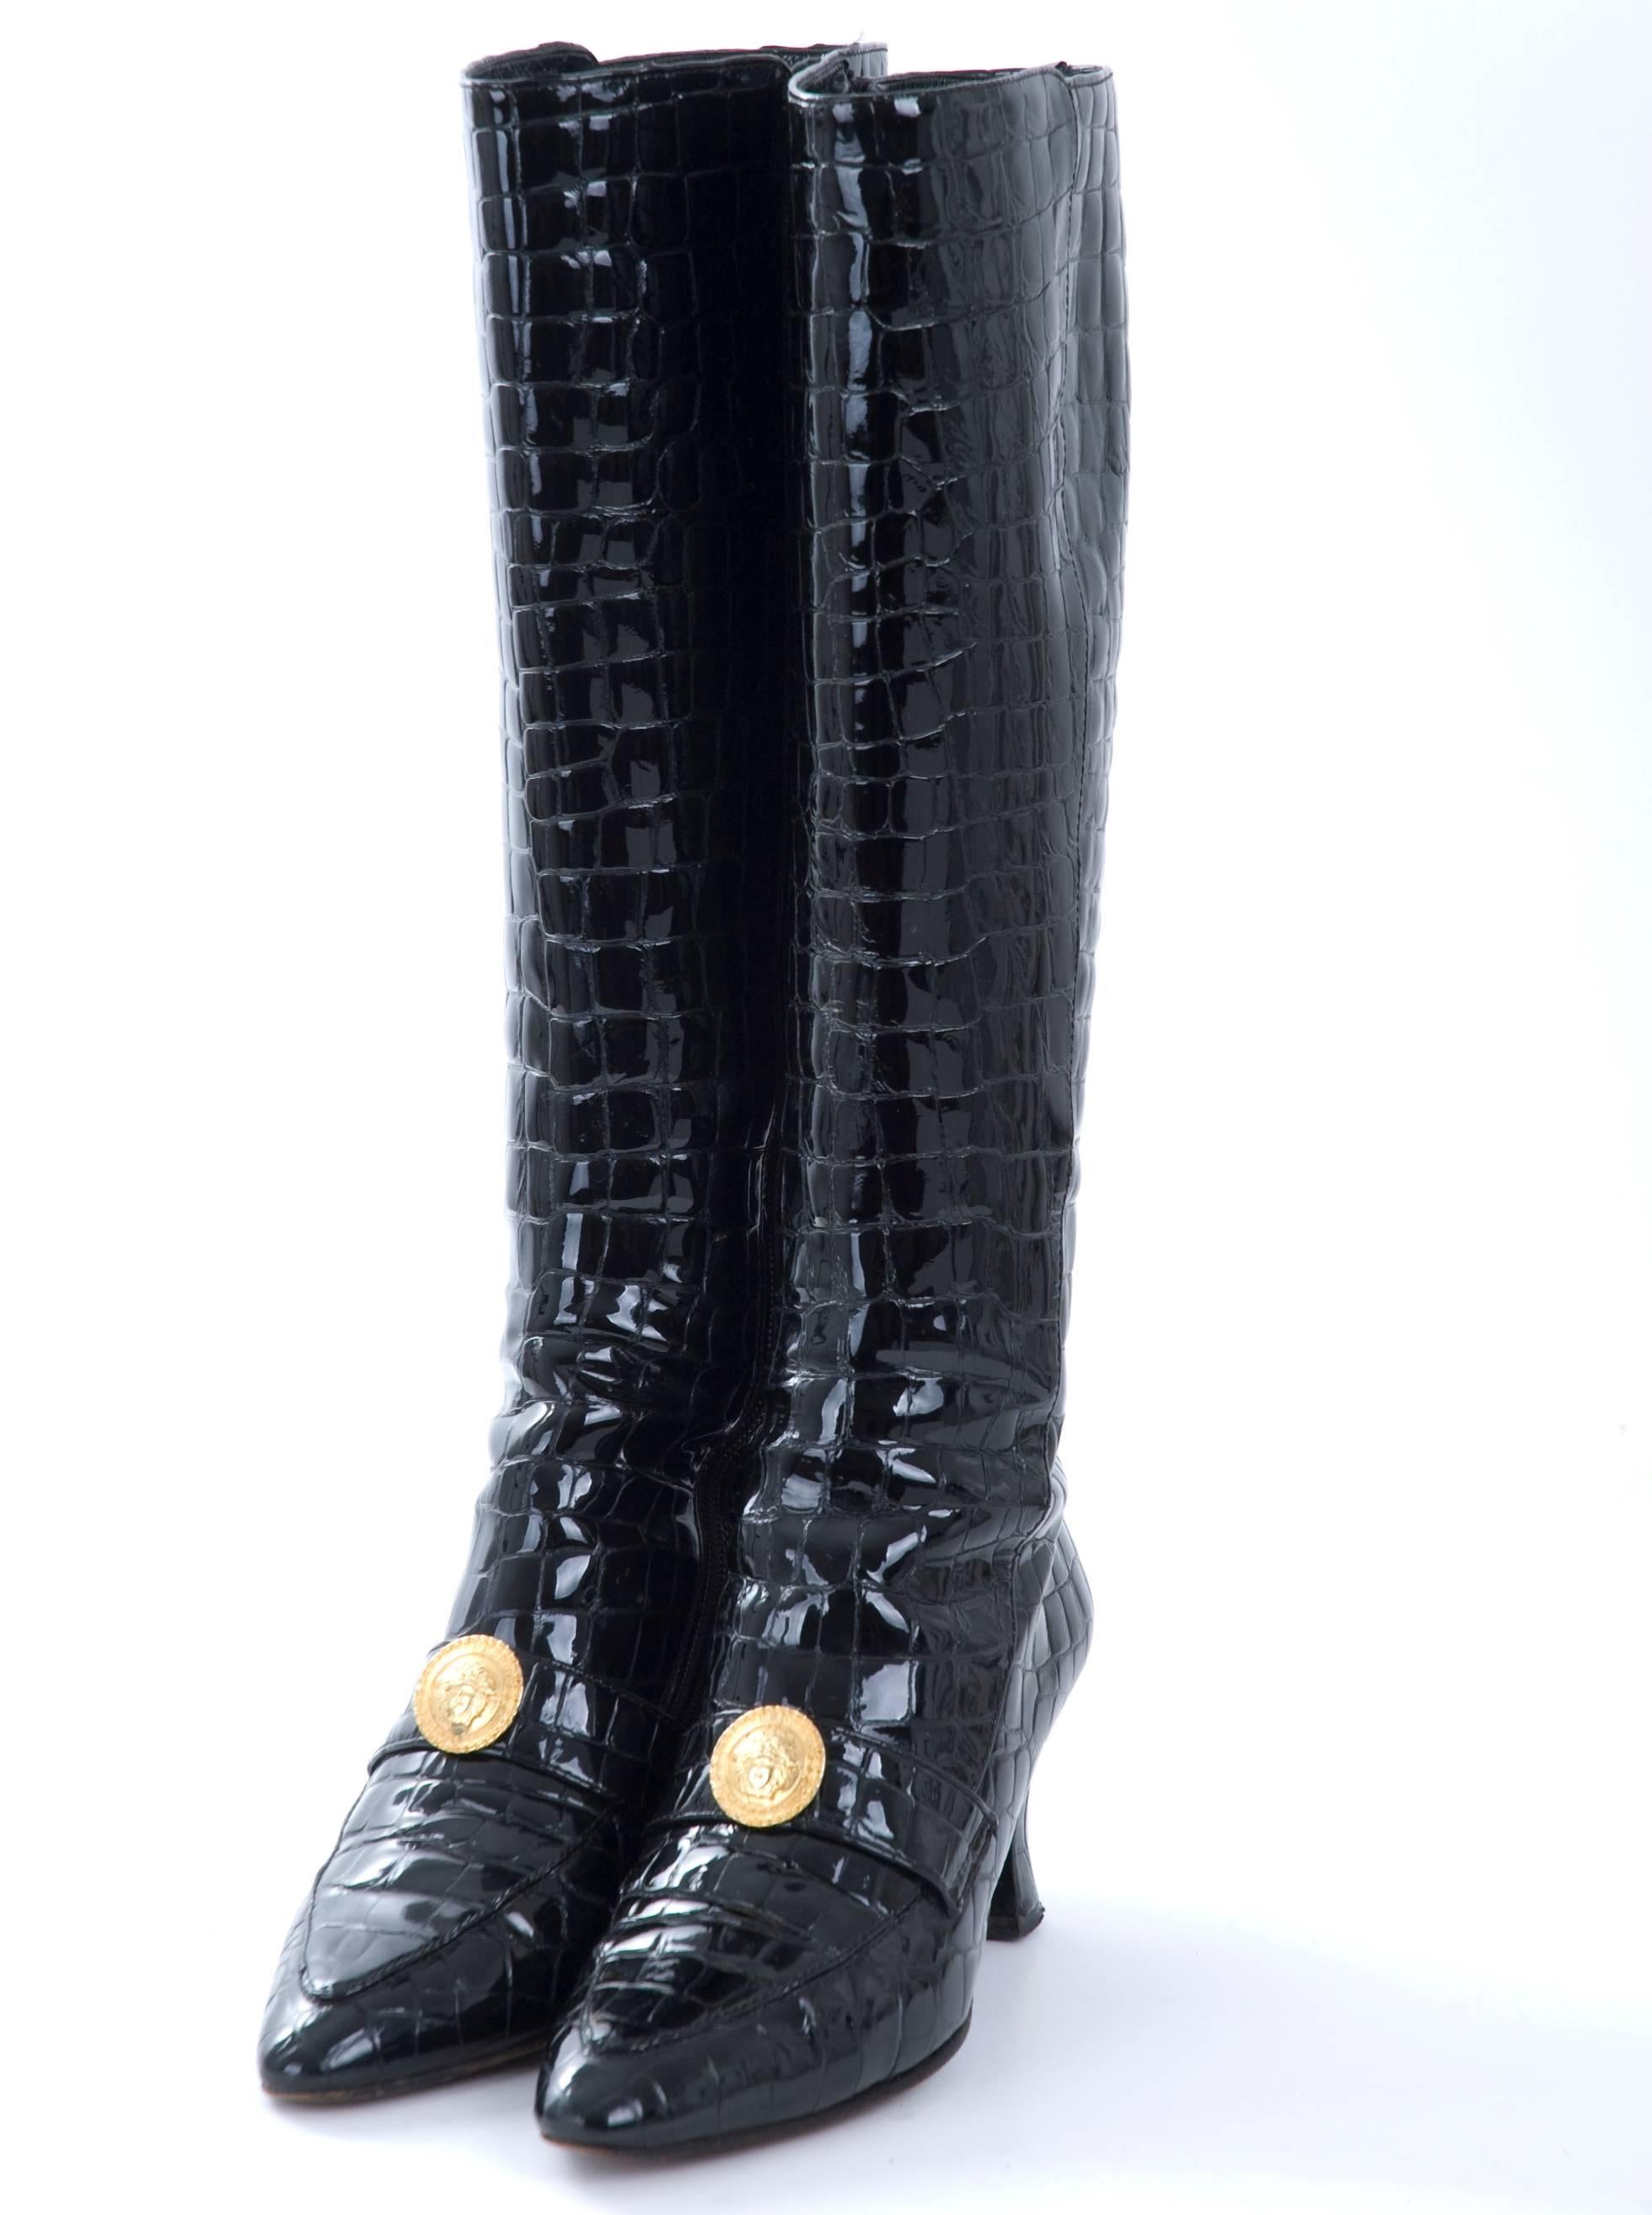 Vintage Gianni Versace crocodile pattern leather boots with gilded medusa buckle. The boots have been used but the have no scratches, just the botton shows signs of use. Please see pictures.
Size 36,5 EU = 6.5 US